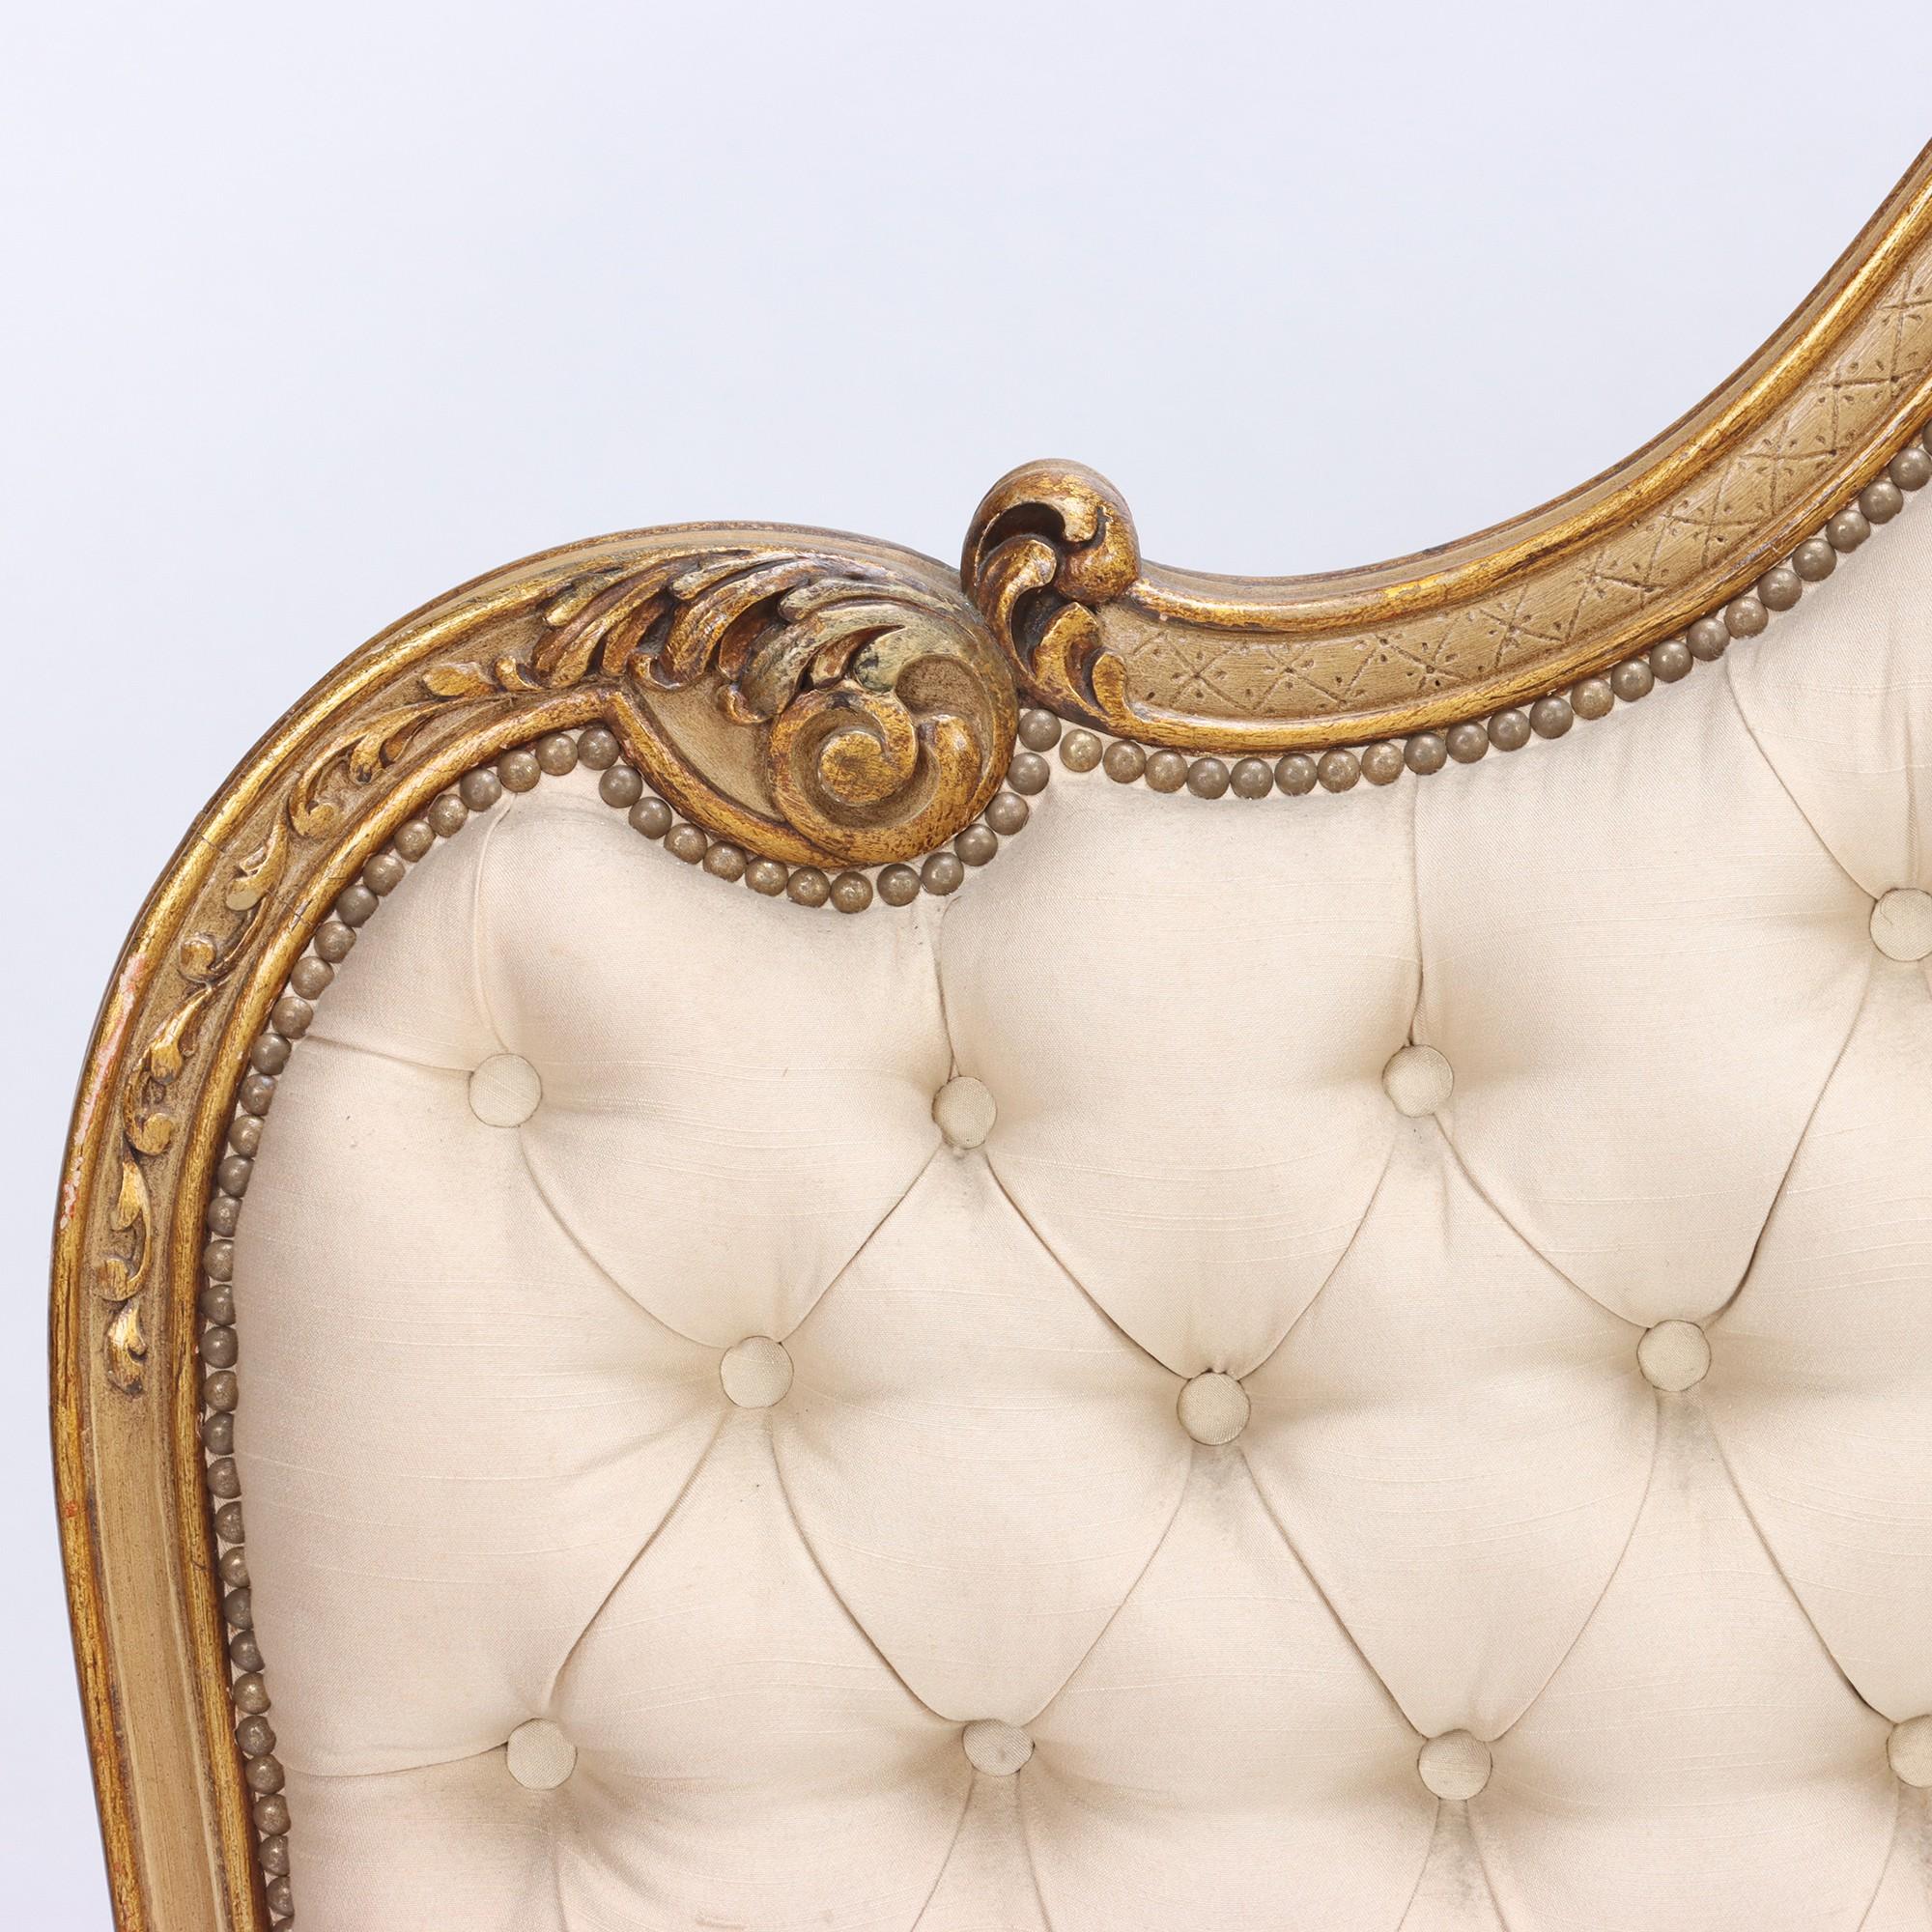 A French Louis XV style Queen size bed frame with curved footboard. All tufted. Circa 1950.
Interior D: 59